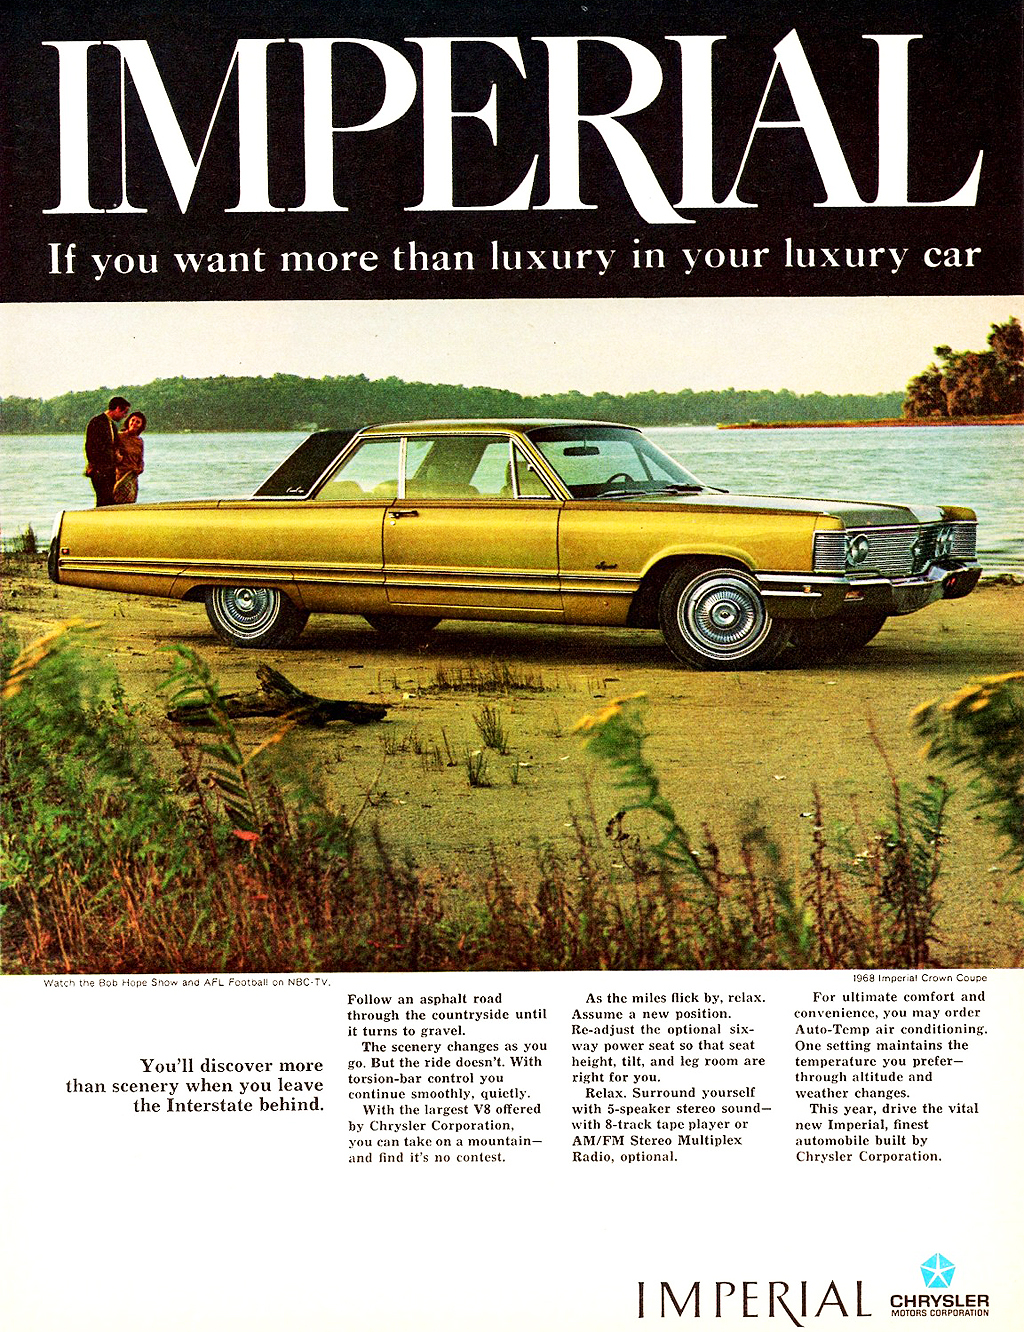 Chrysler 1968 Imperial Crown Coupe